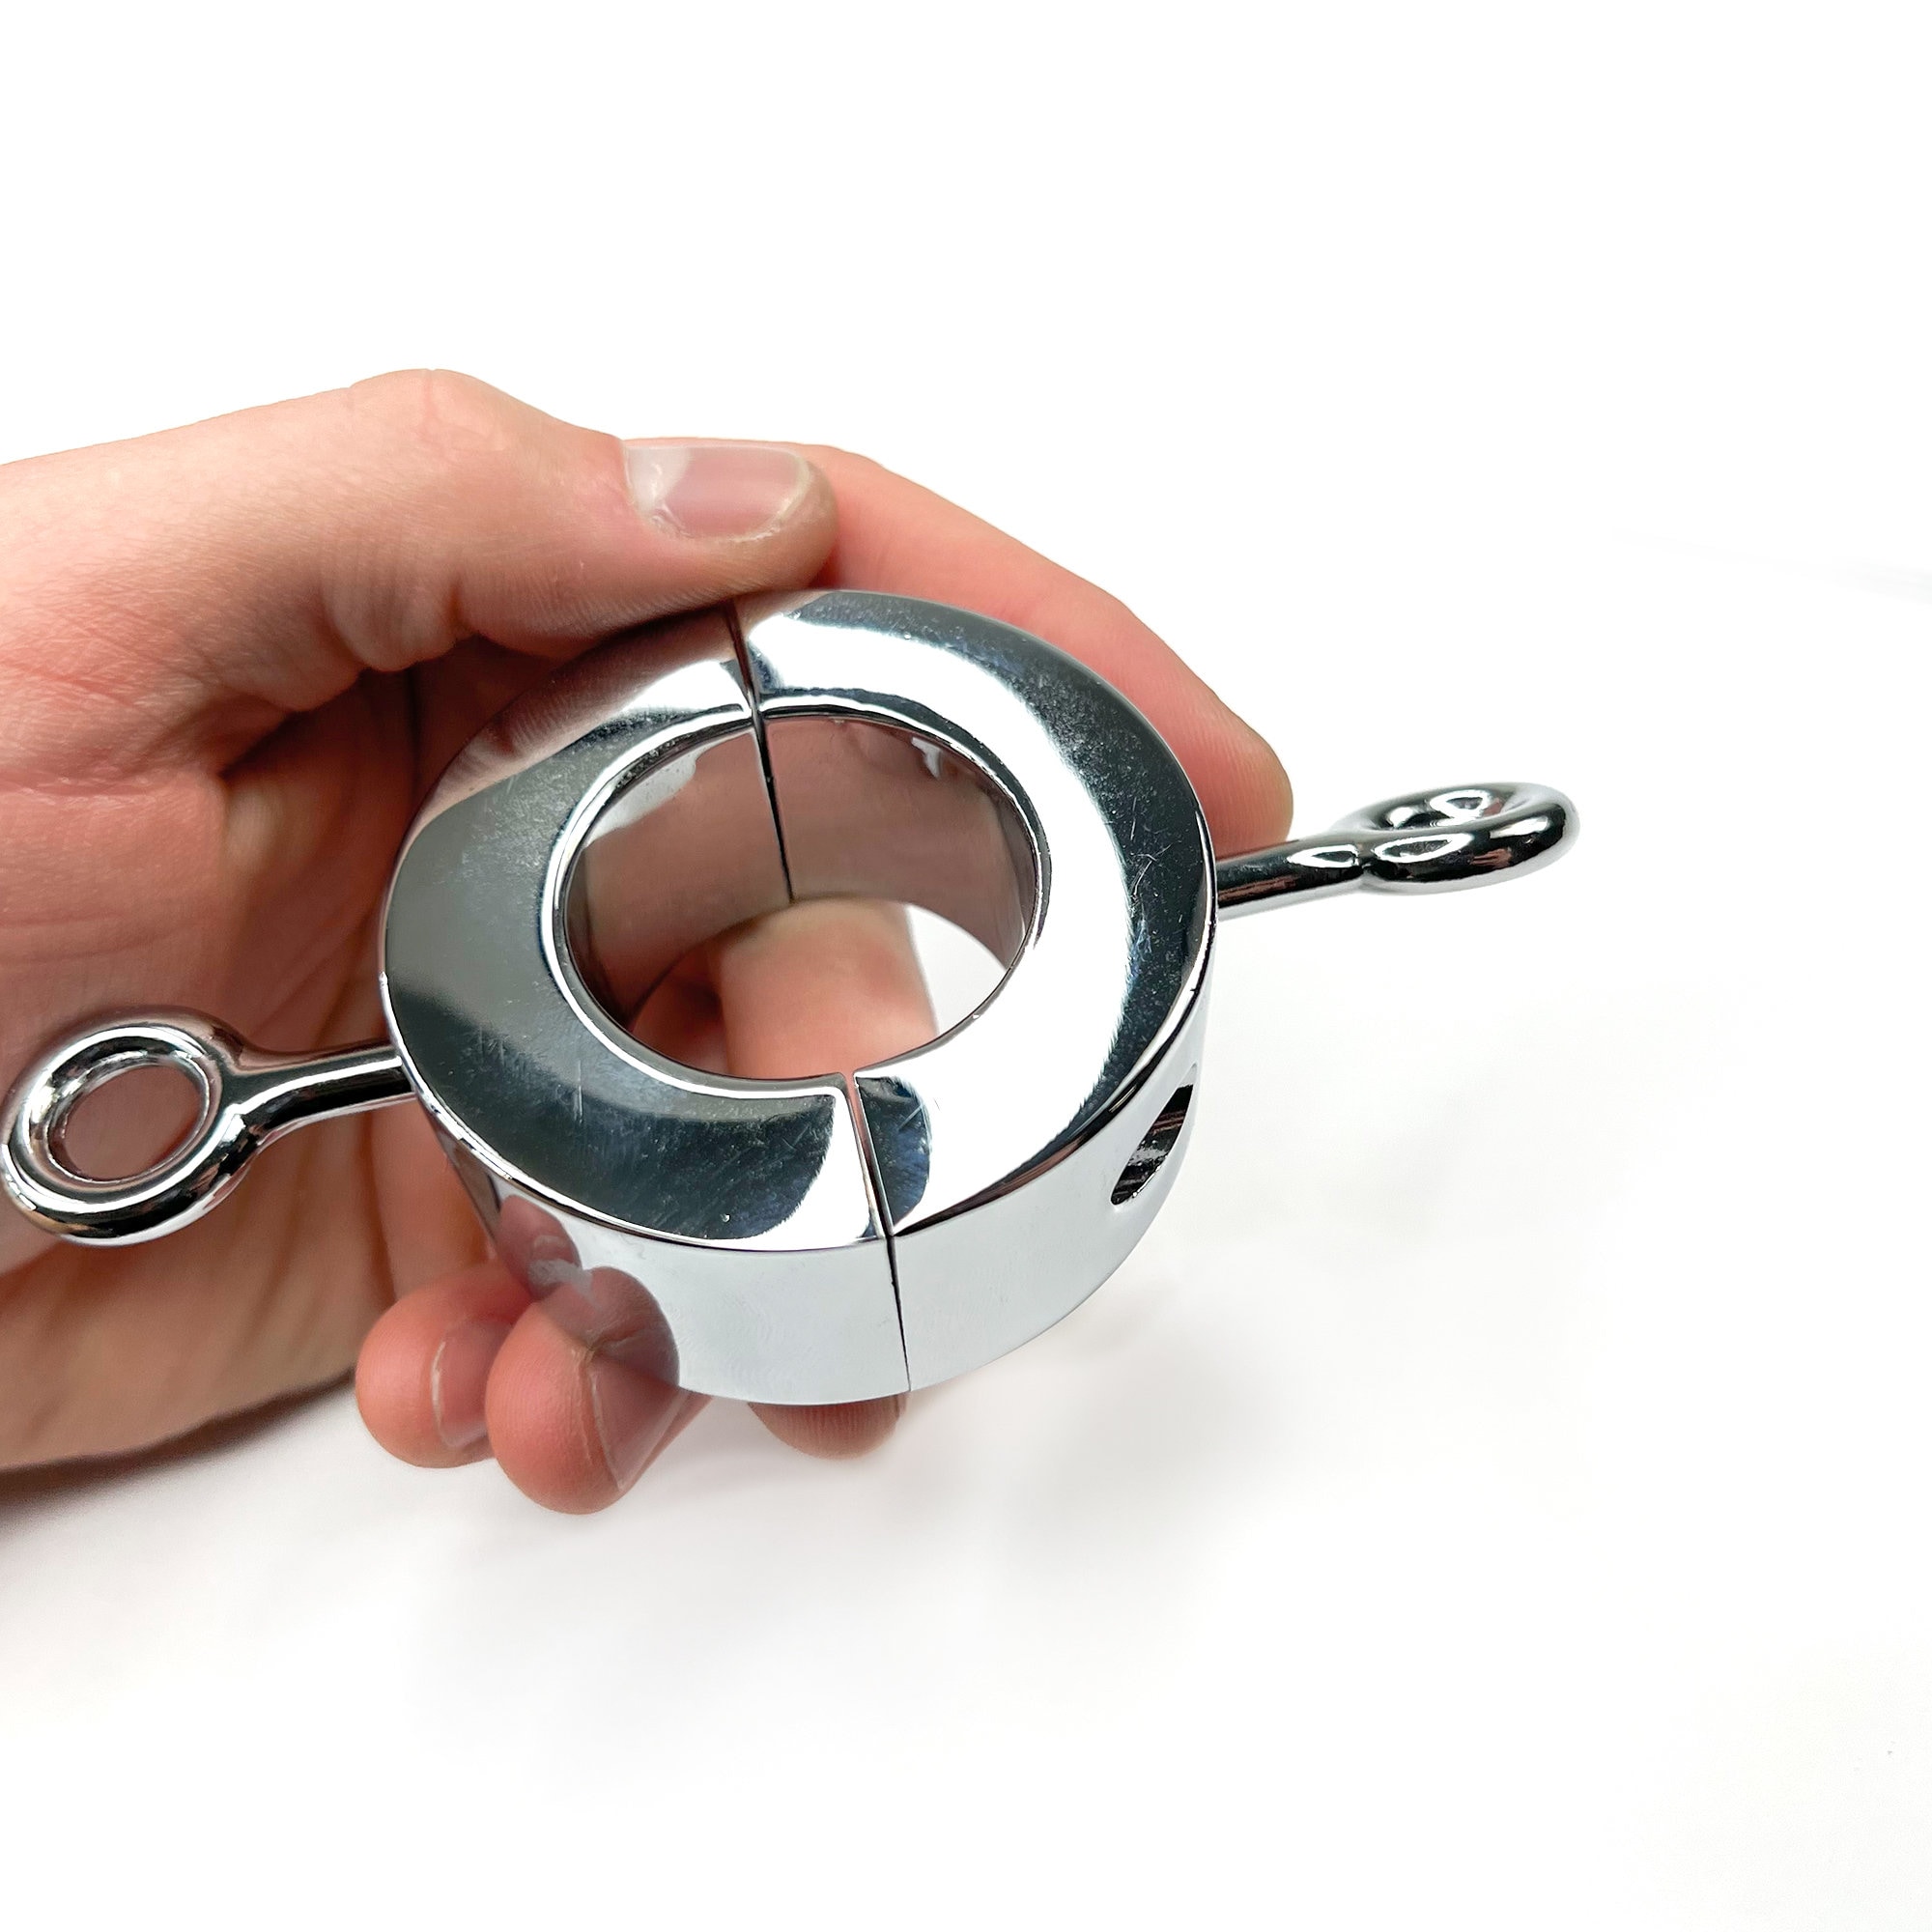 STAINLESS STEEL MAGNETIC BALL WEIGHT TESTICLE STRETCHER RING BONDAGE CBT 4  SIZE